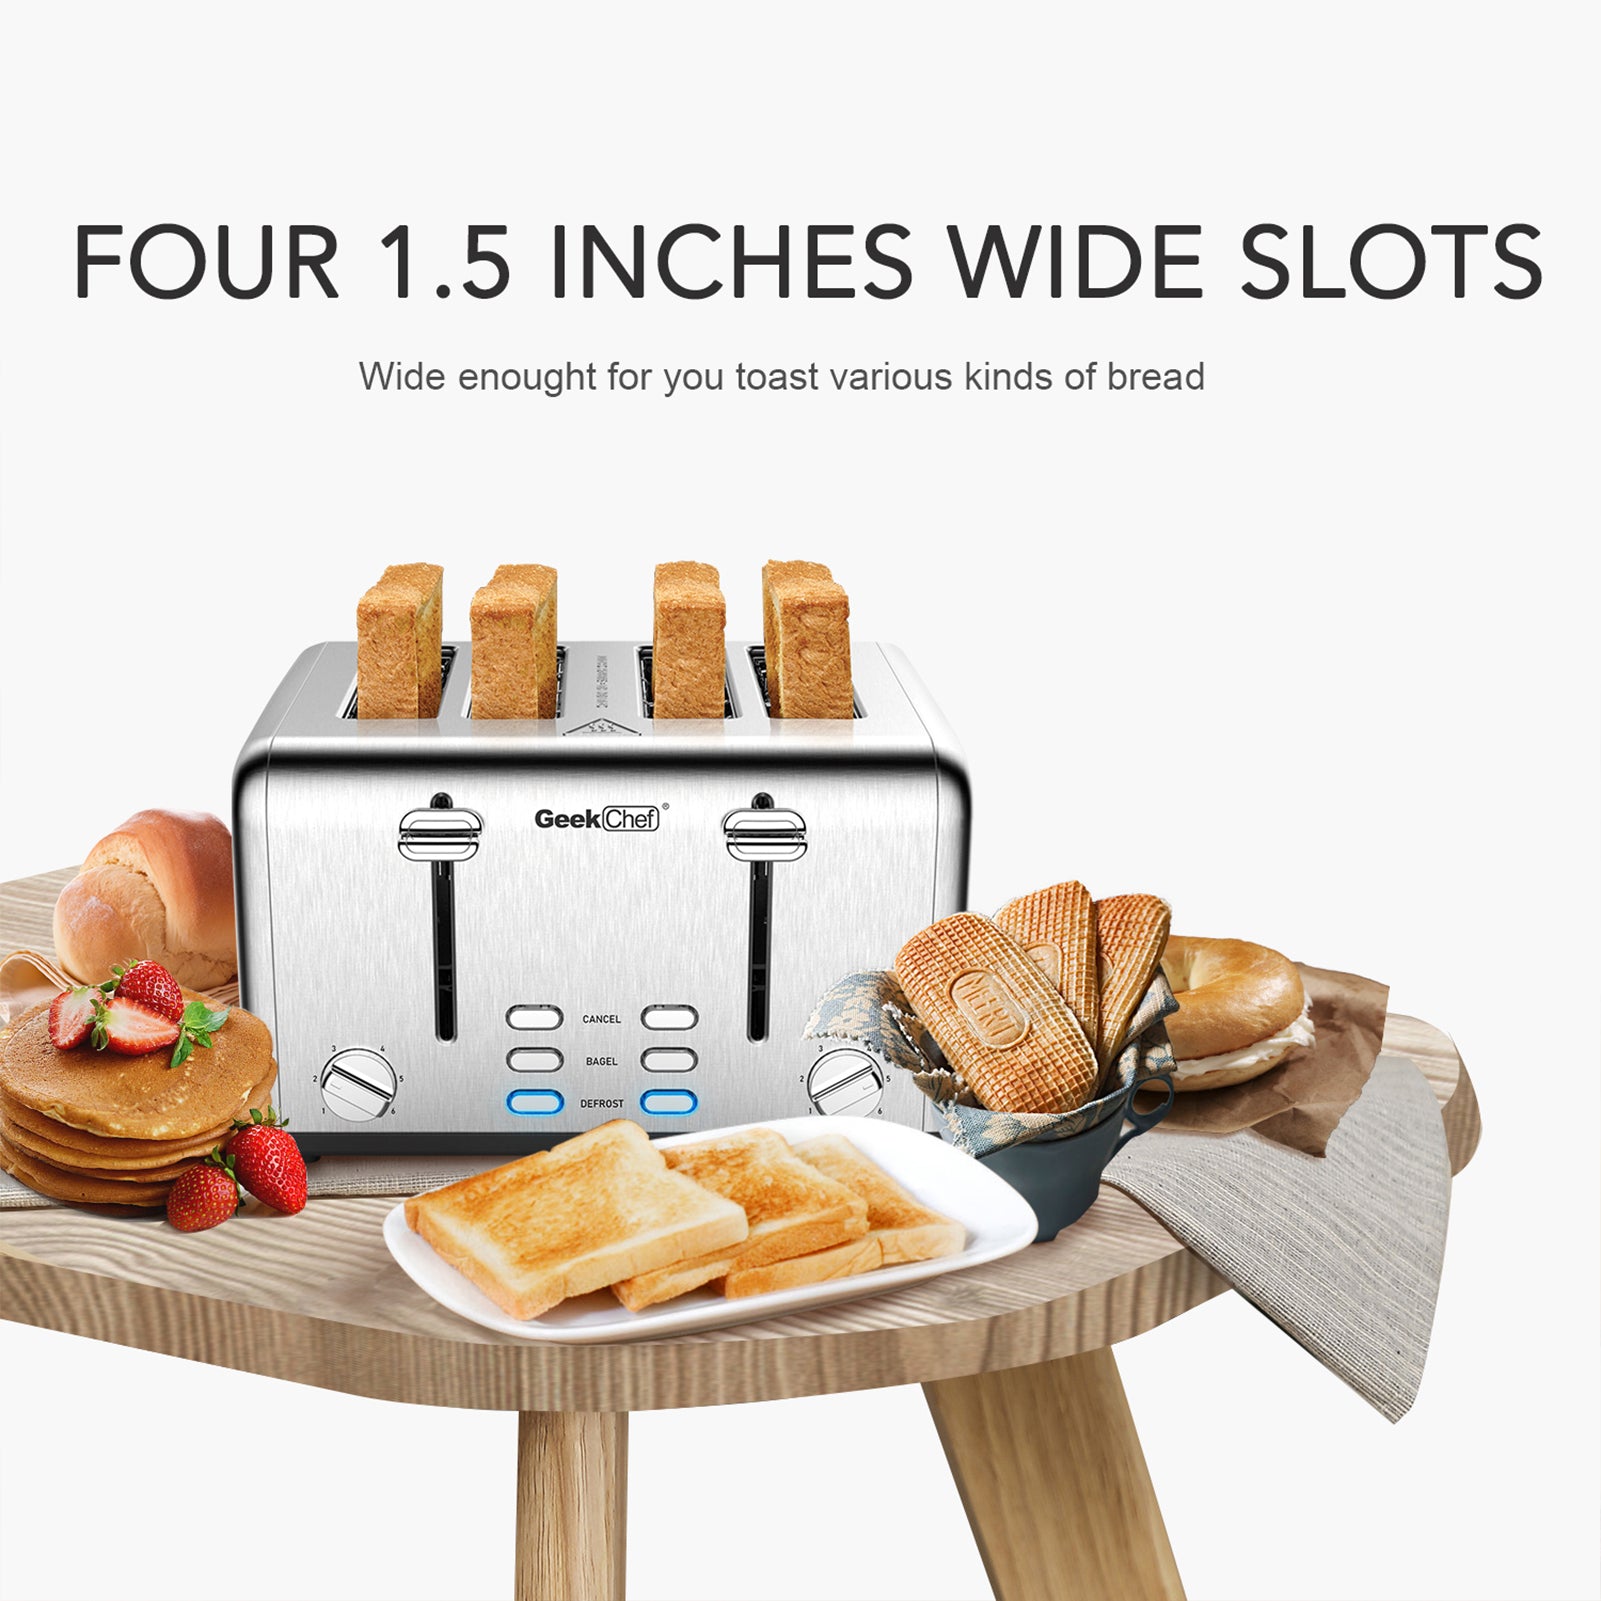 Toaster 4 Slice, SEVENTH Stainless Steel Extra-Wide Slot Toaster, 6 Toasting  Color Settings, Auto Pop-Up Toaster with Bagel/Defrost/Cancel Function,  Toaster with Removable Crumb Trays, Silver, J2706 